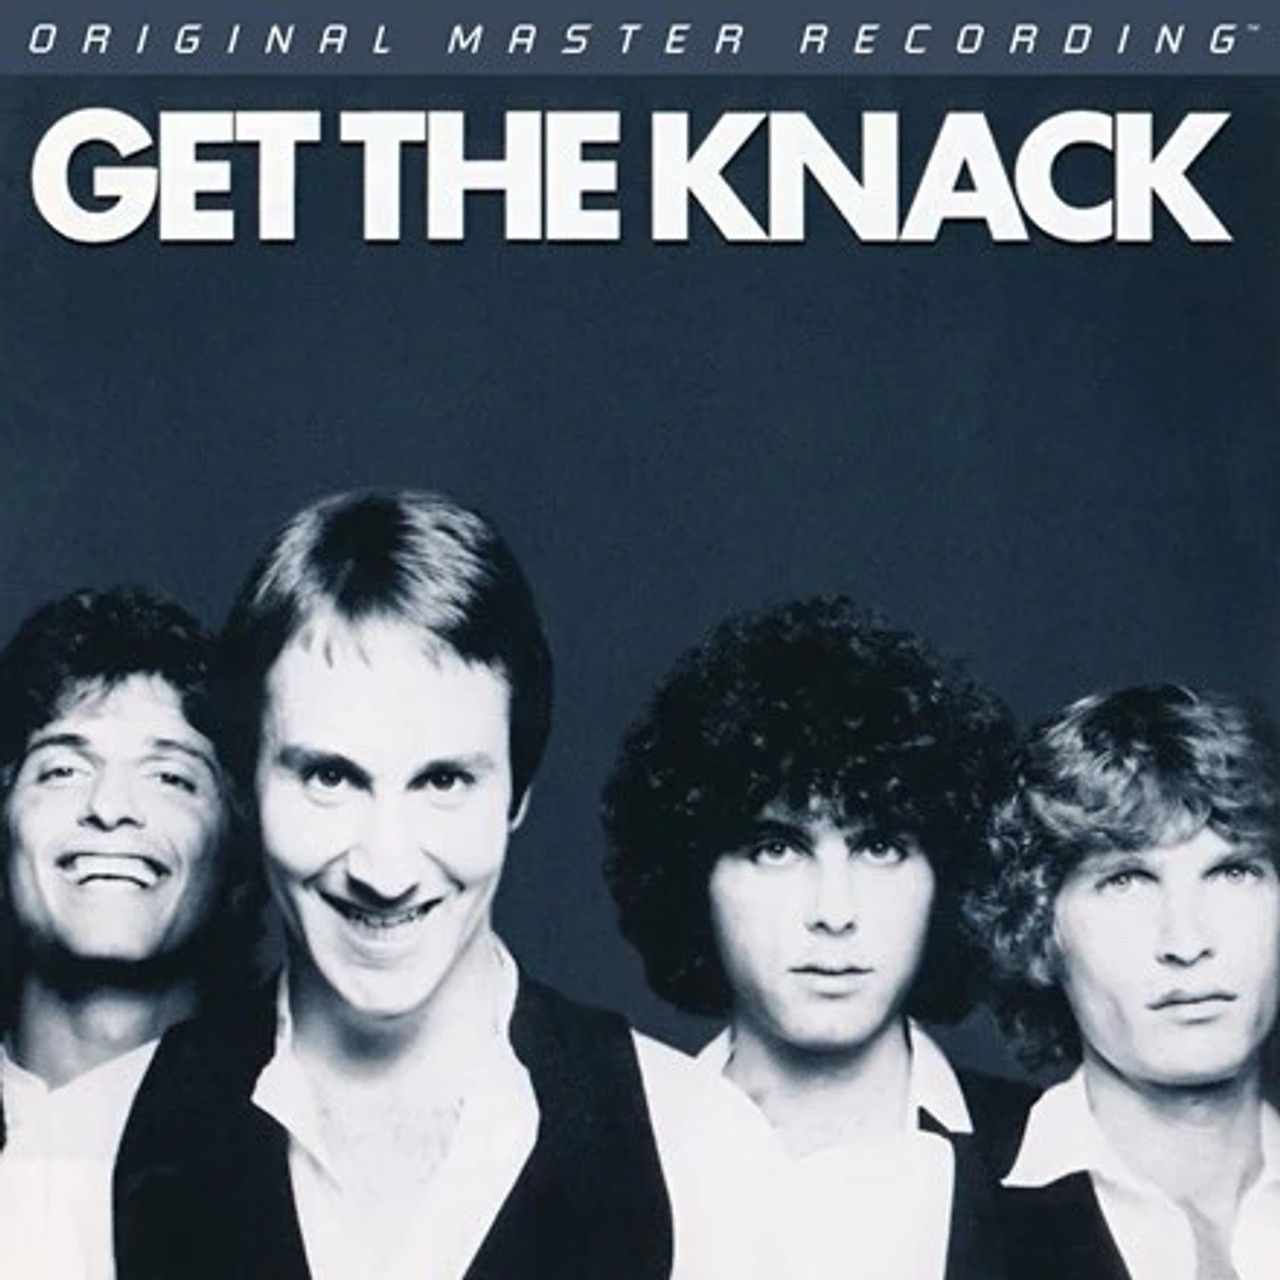 The Knack - Get The Knack (Limited to 2,000, Numbered Hybrid SACD)